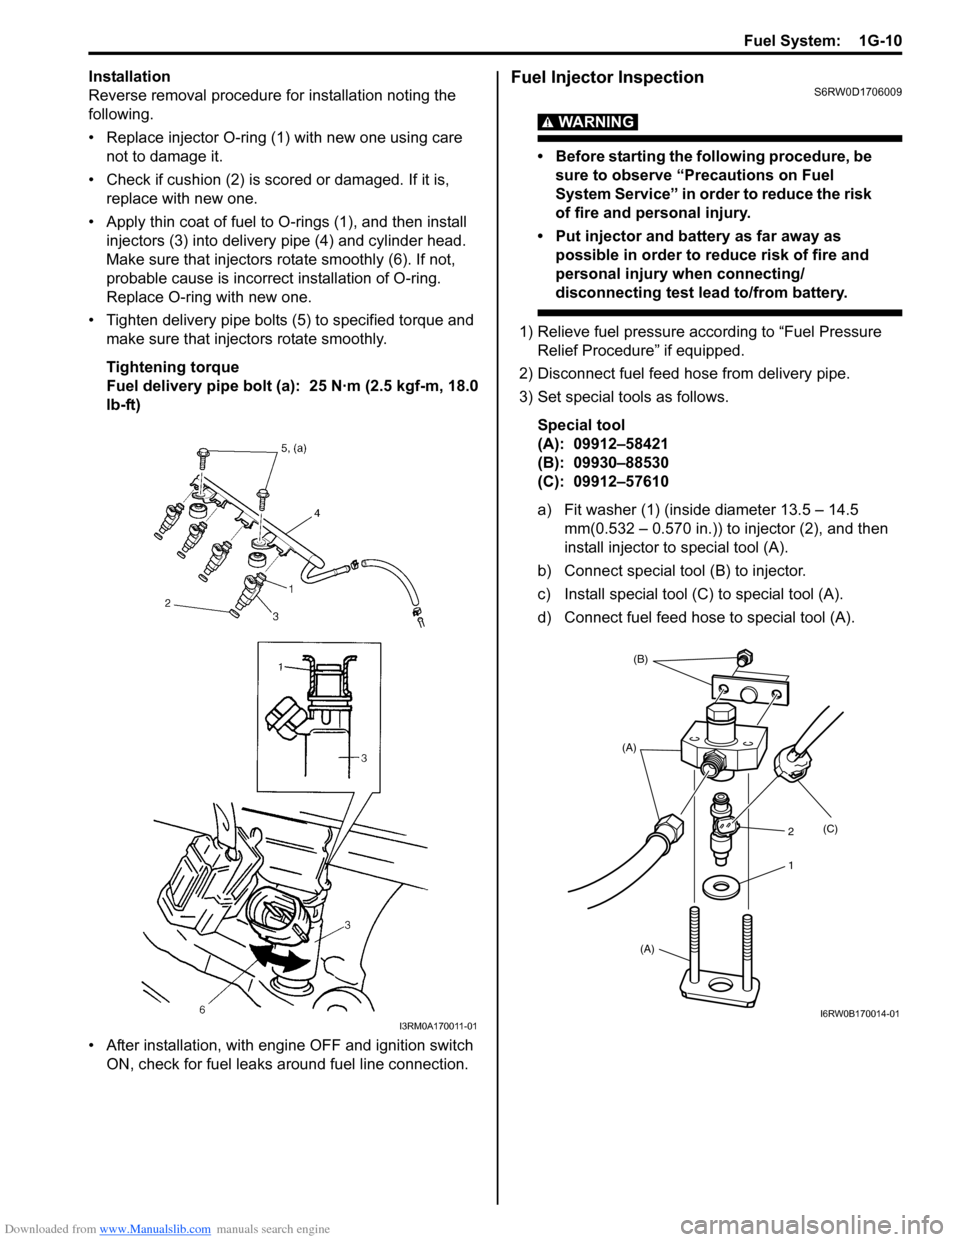 SUZUKI SX4 2006 1.G Service Workshop Manual Downloaded from www.Manualslib.com manuals search engine Fuel System:  1G-10
Installation
Reverse removal procedure for installation noting the 
following.
• Replace injector O-ring (1) with new one